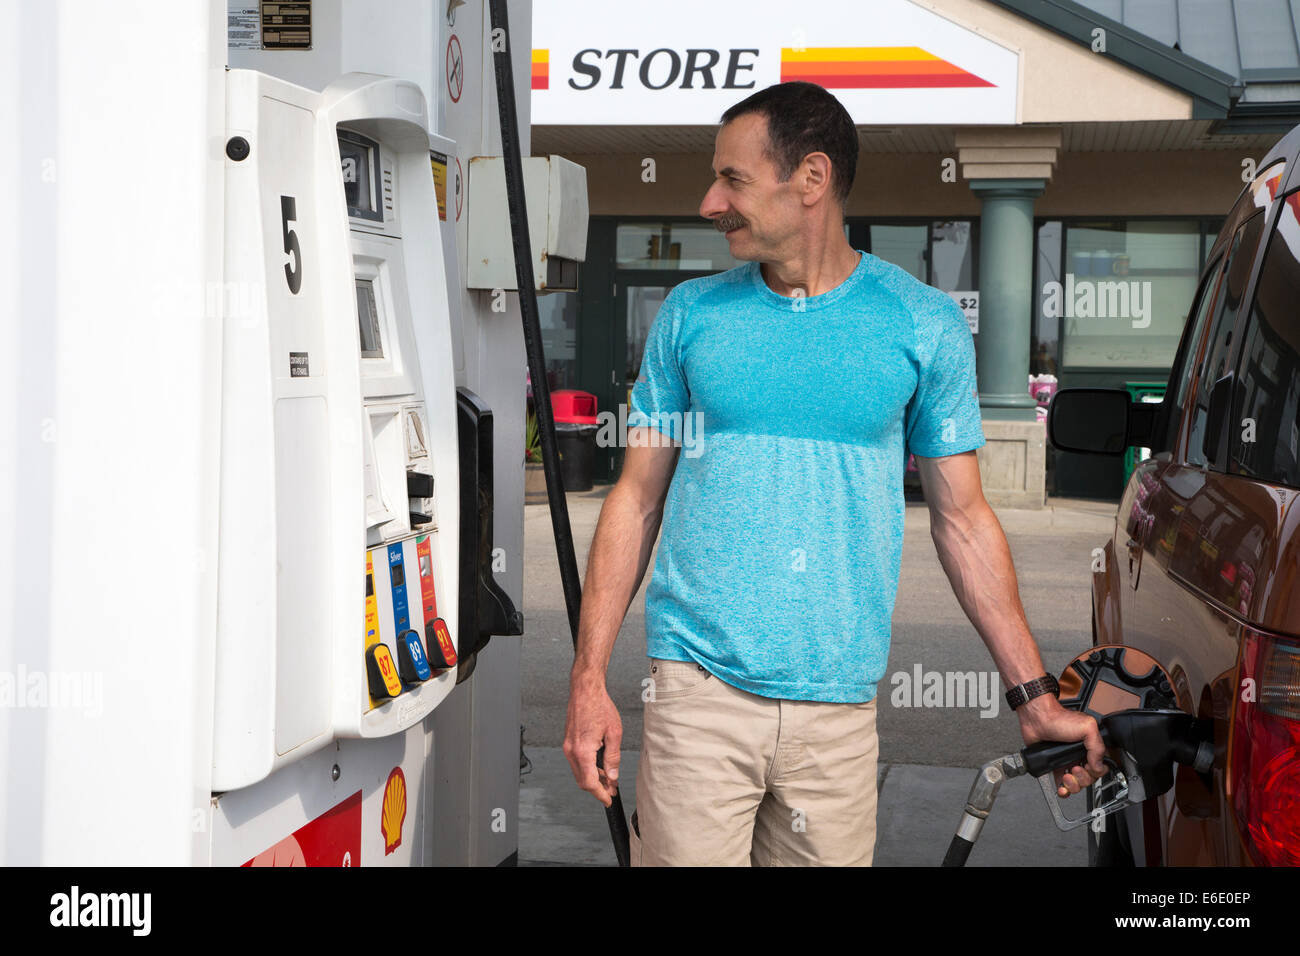 Man pumping gas into his vehicle while watching the price display at a service station in Alberta, Canada Stock Photo